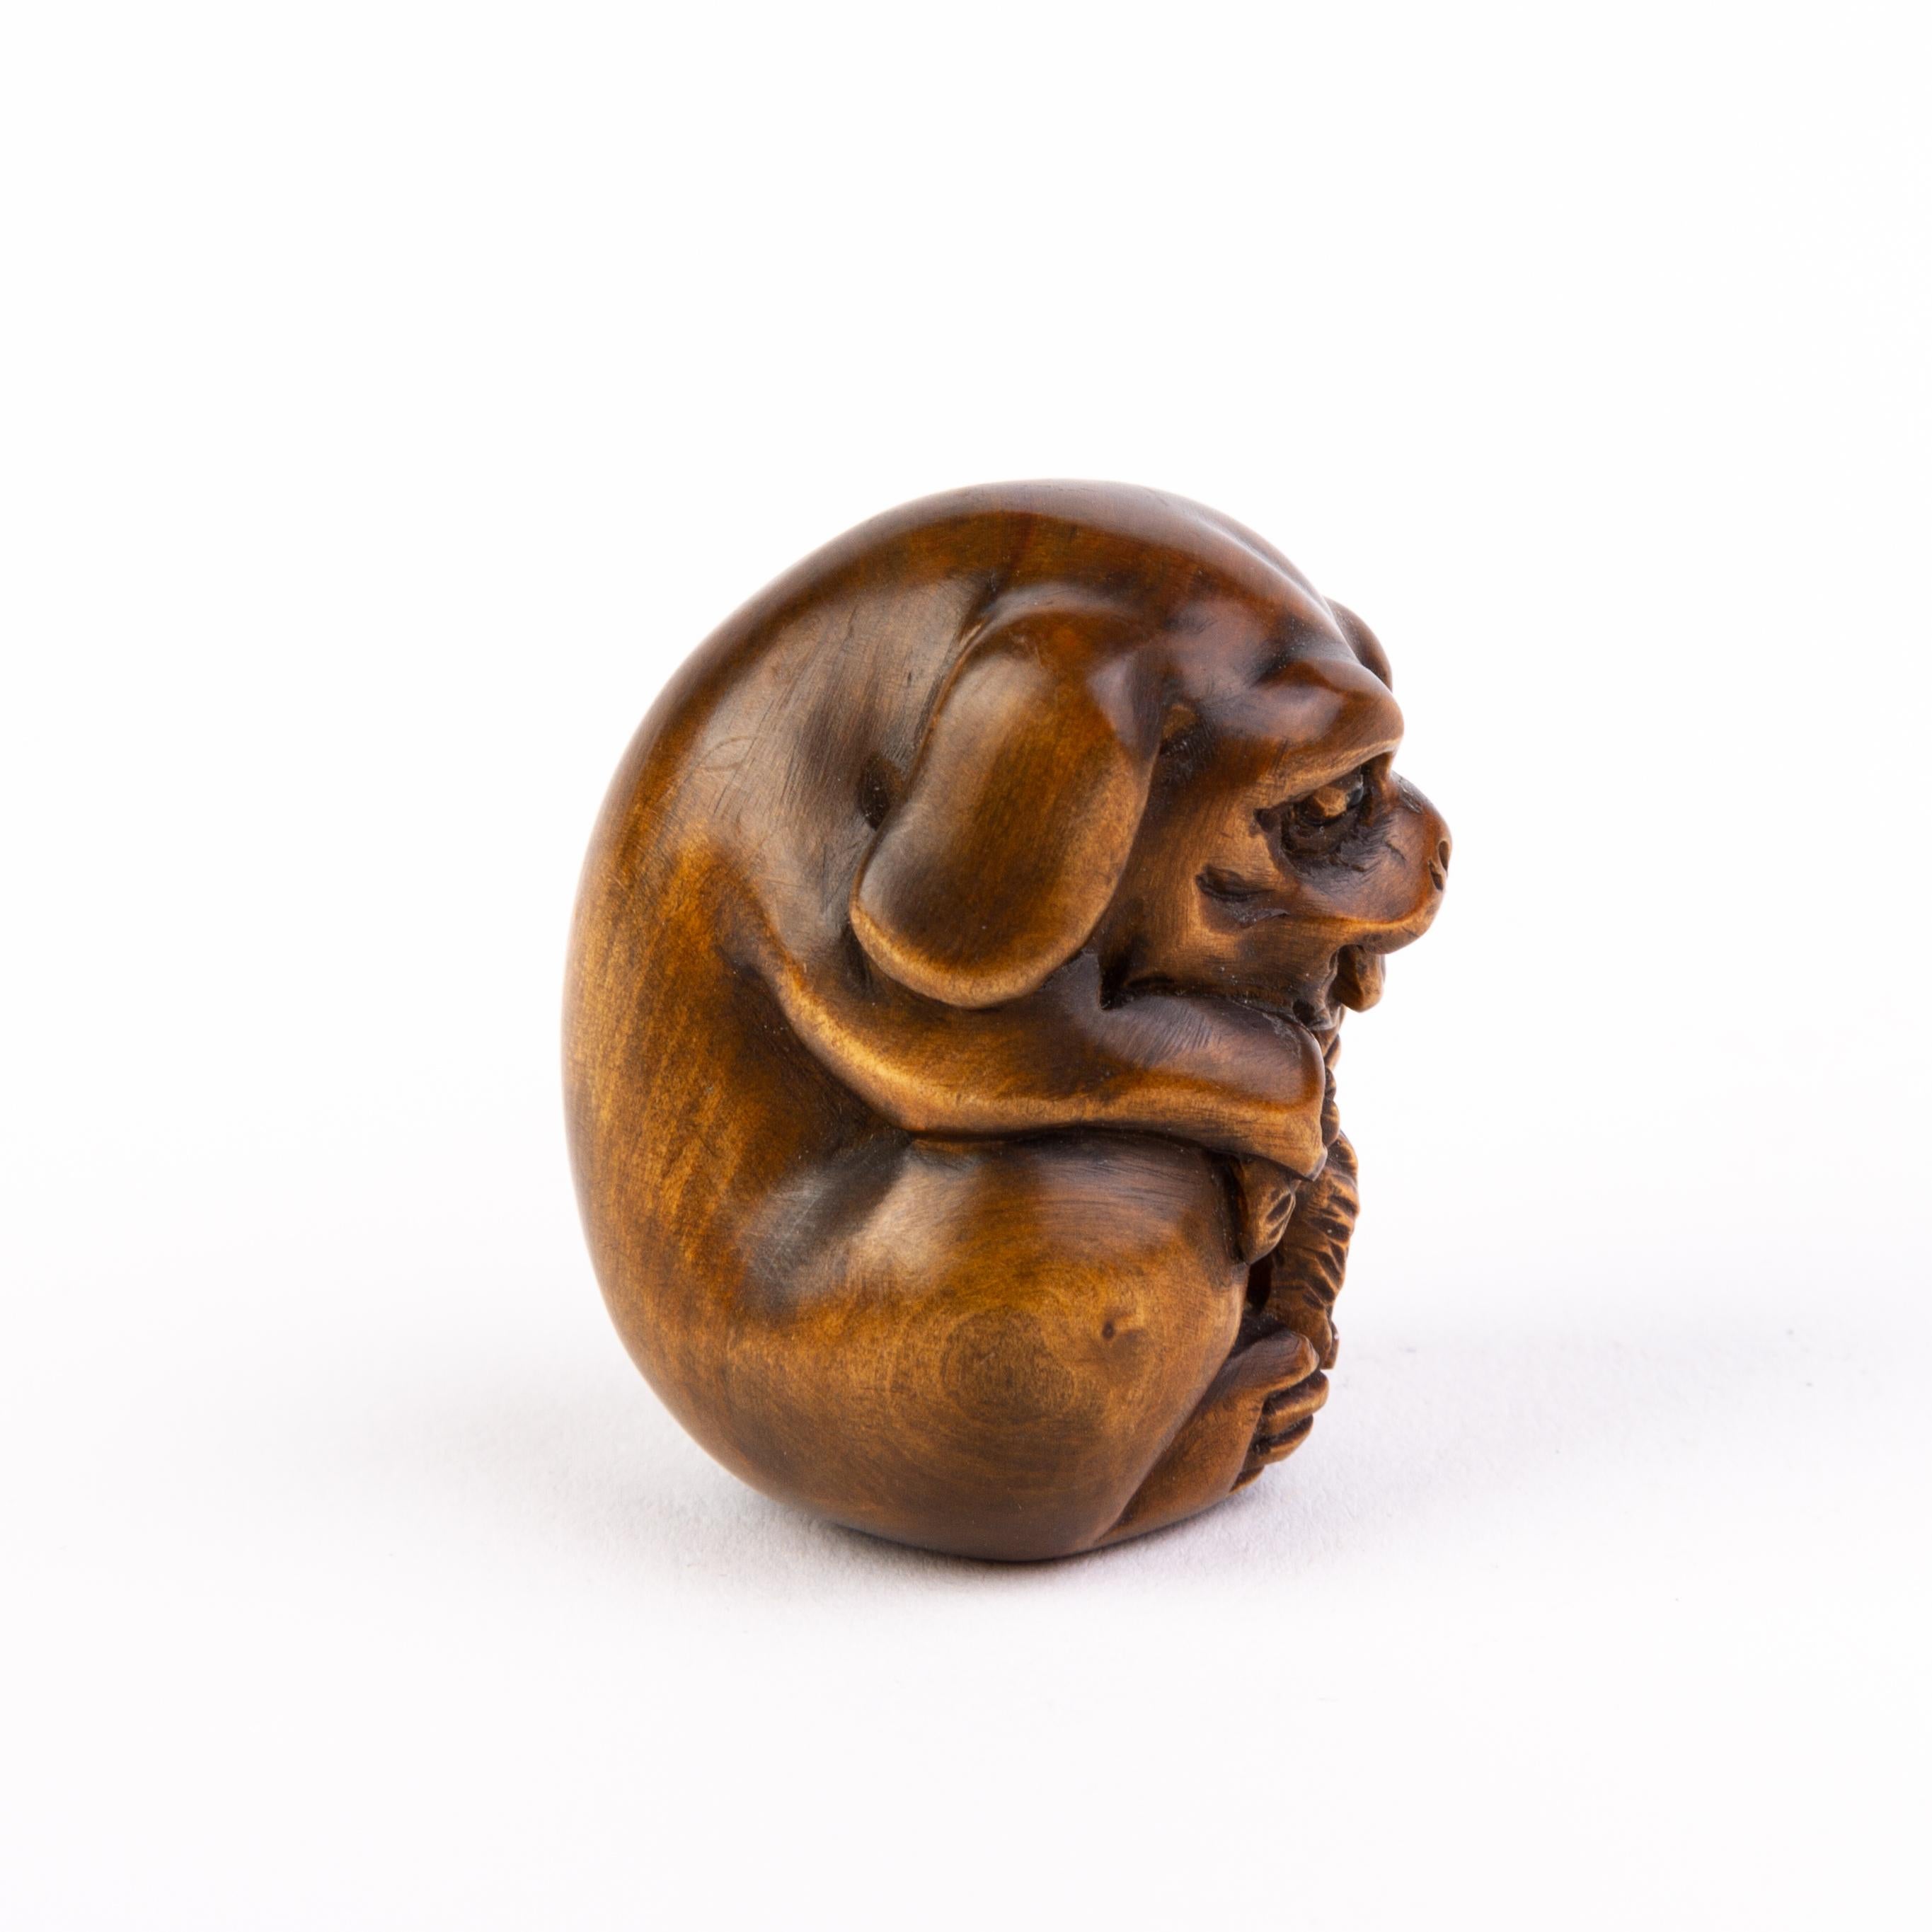 In good condition
From a private collection
Free international shipping
Signed Japanese Boxwood Netsuke Inro of Puppy Dog 